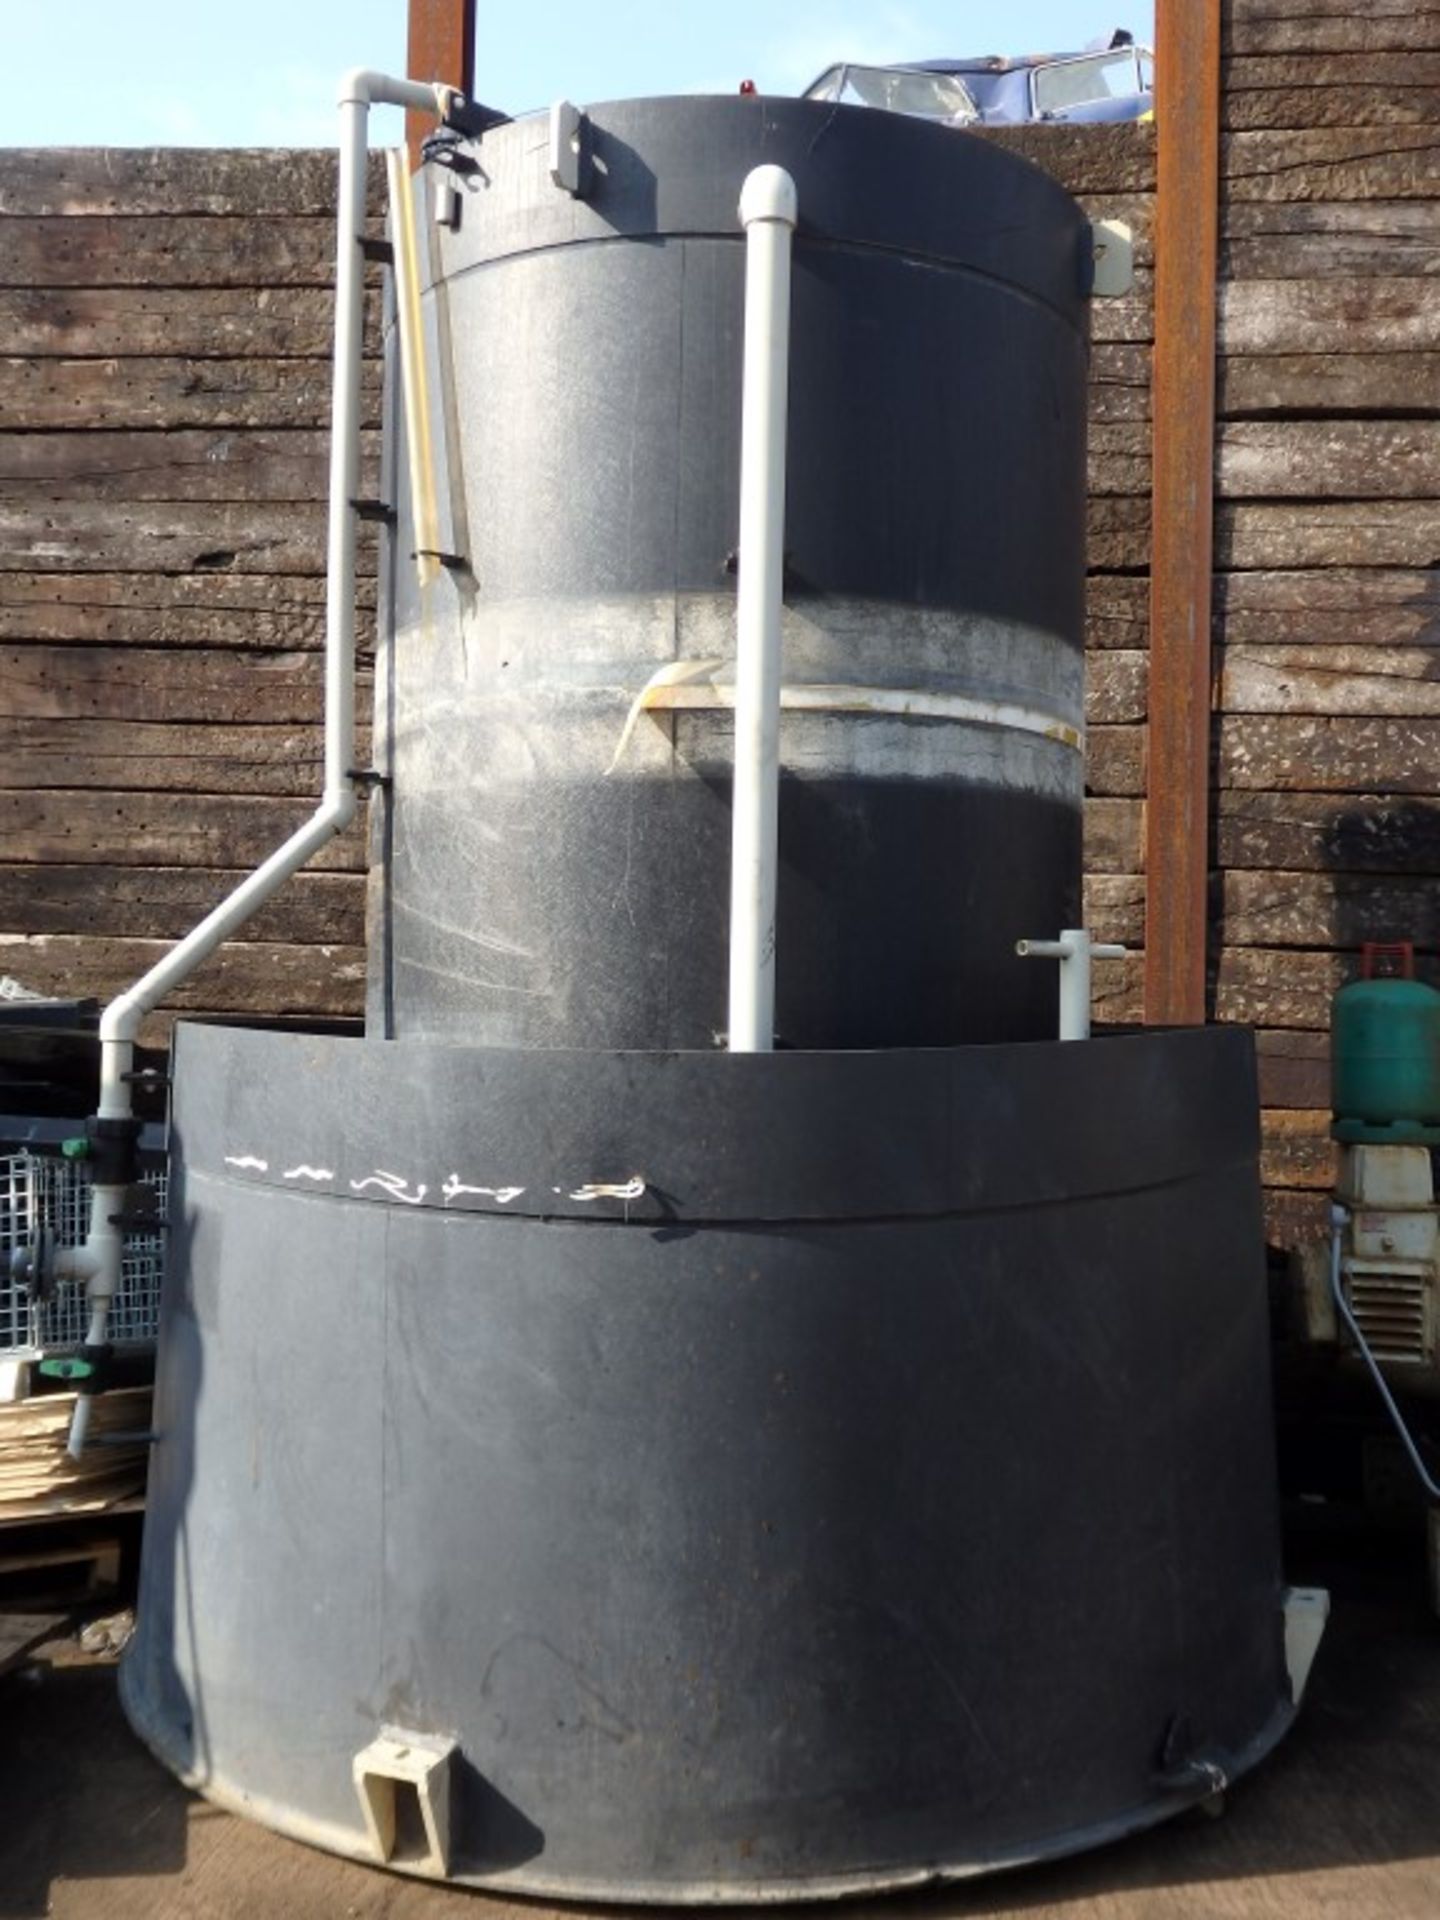 1 x Water Tower Bowser Tank - Used for Storing Rain, Water, Oils or Acids - Overall Height: 370cm